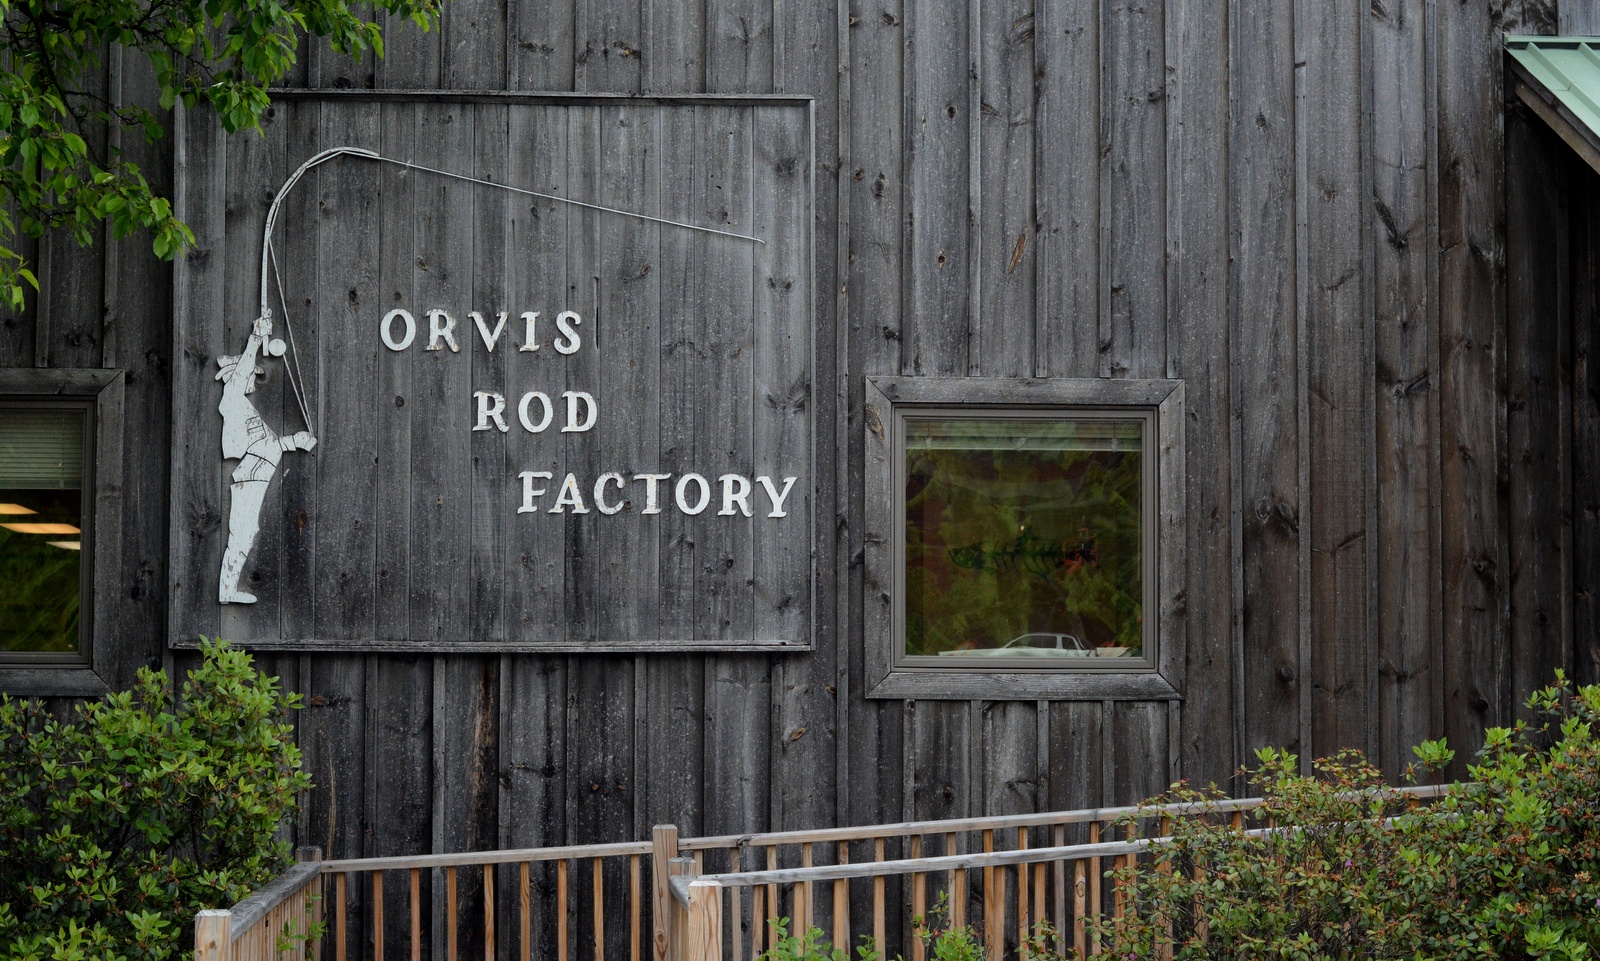 The Fiberglass Manifesto: A Morning At The Orvis Rod Factory